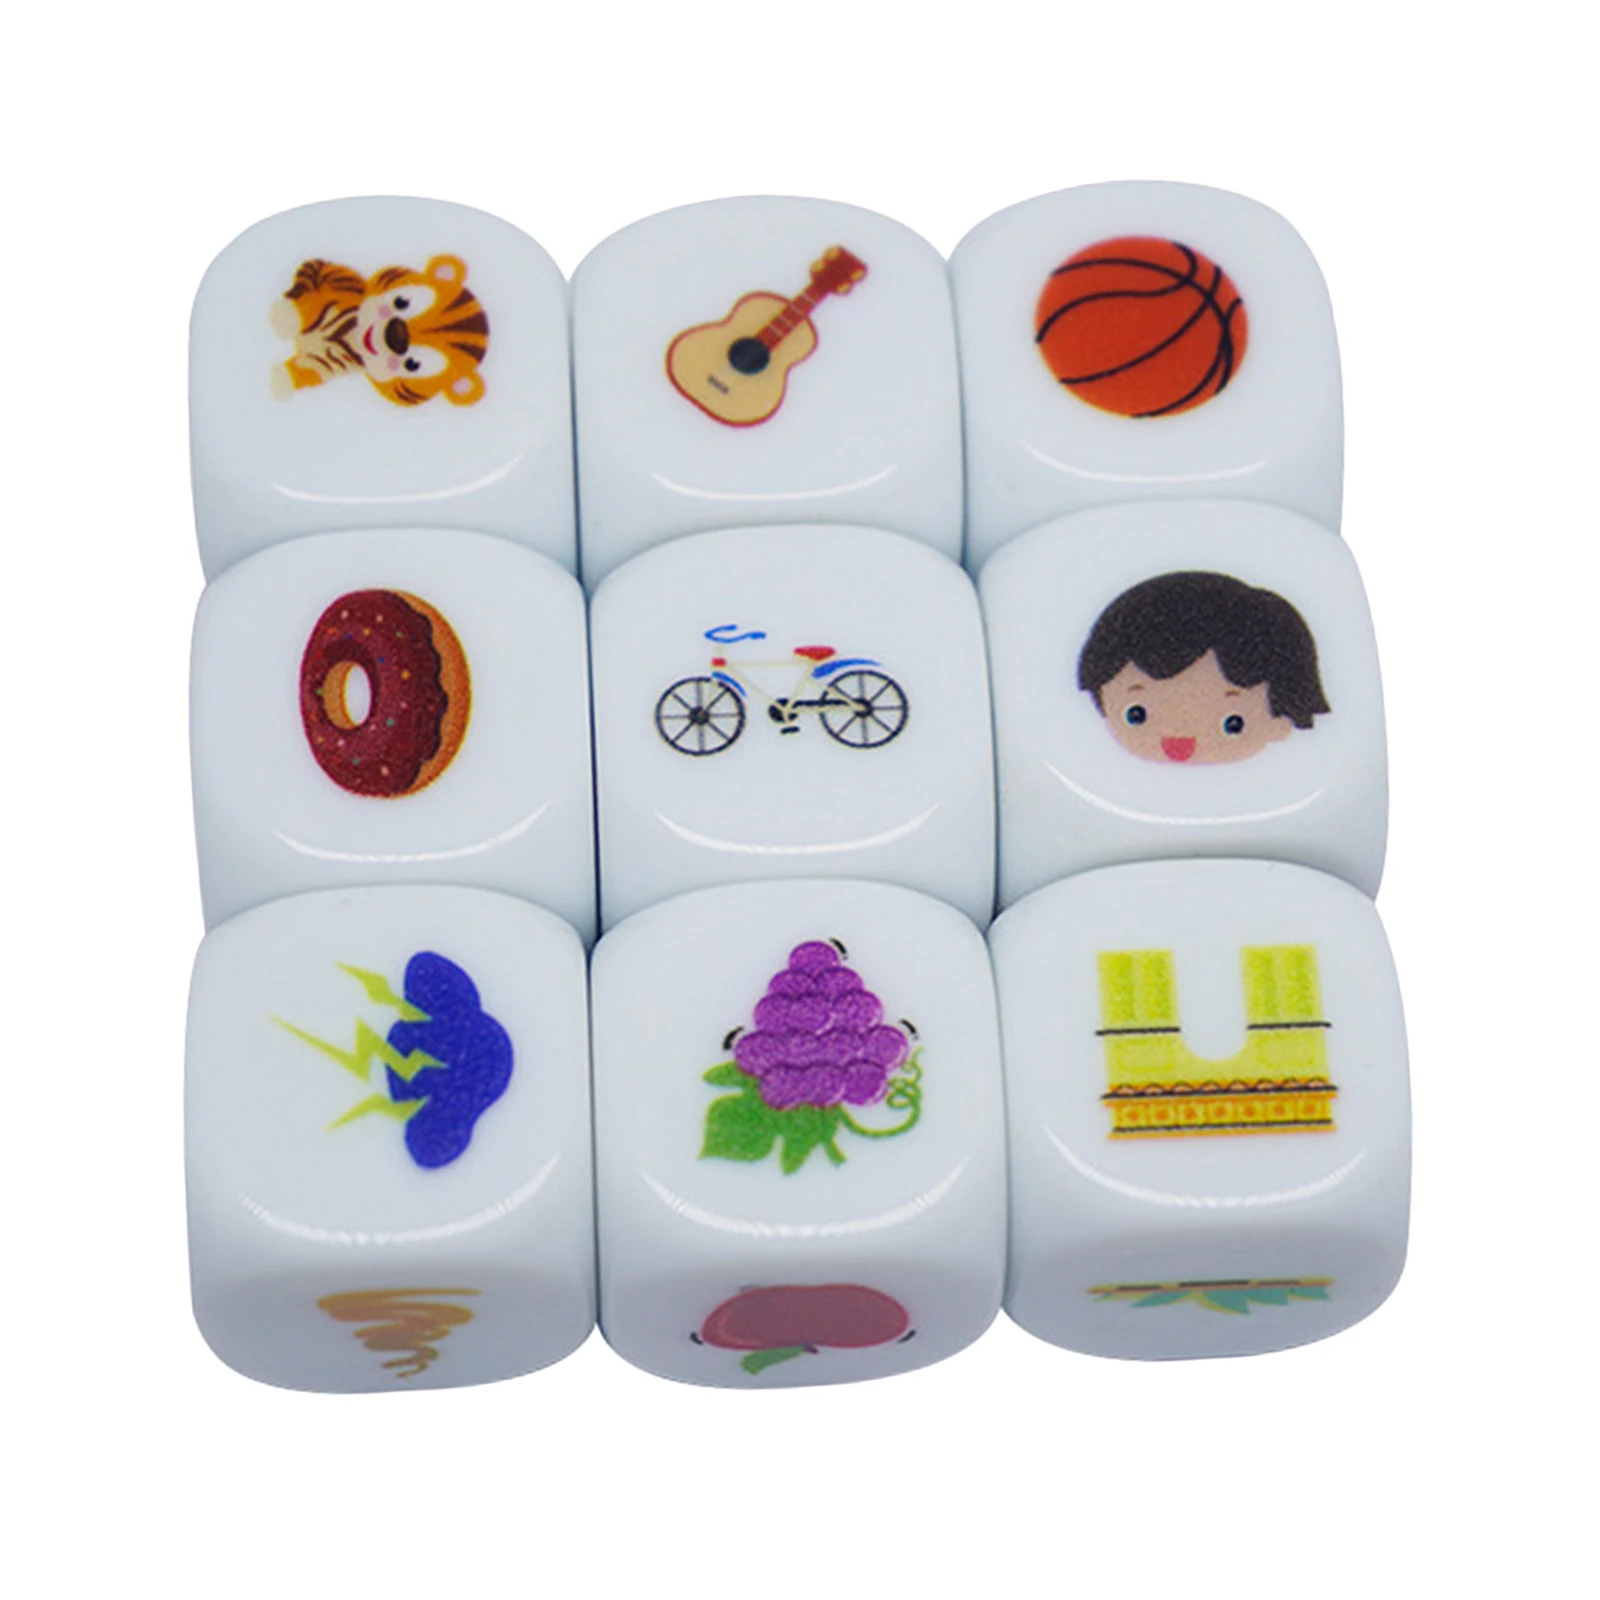 9x Acrylic Story Cubes Set Storytelling Dice Puzzle Game w/ Various Pictures for